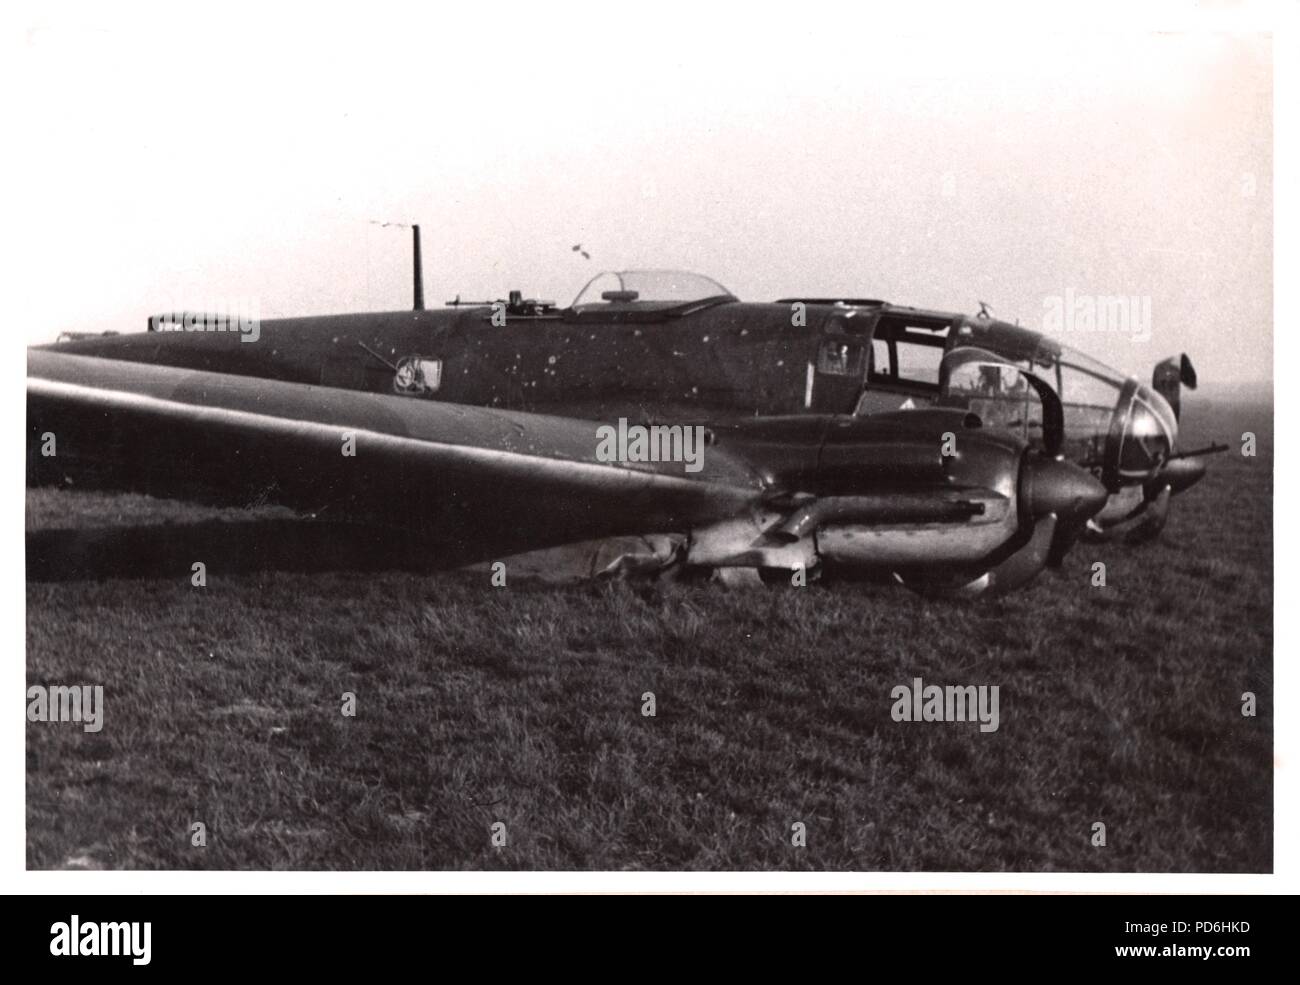 Image from the photo album of Oberleutnant Oscar Müller of  Kampfgeschwader 1: Heinkel He 111 H-2 (Wrk Nr. 2728) V4+CV of 5./KG 1 at Harchies in Belgium after it was force-landed by Leutnant Oscar Müller on the night of 16th/17th October 1940 as a result of Flak damage received during a sortie over London during the Battle of Britain. The crew  of  Leutnant Oscar Müller (Pilot), Feldwebel Küchler (Observer), Feldwebel Henke (Radio Operator), and Unteroffizier Georg Schneiderbanger (Flight Engineer) were all unhurt but the aircraft was written off. Stock Photo